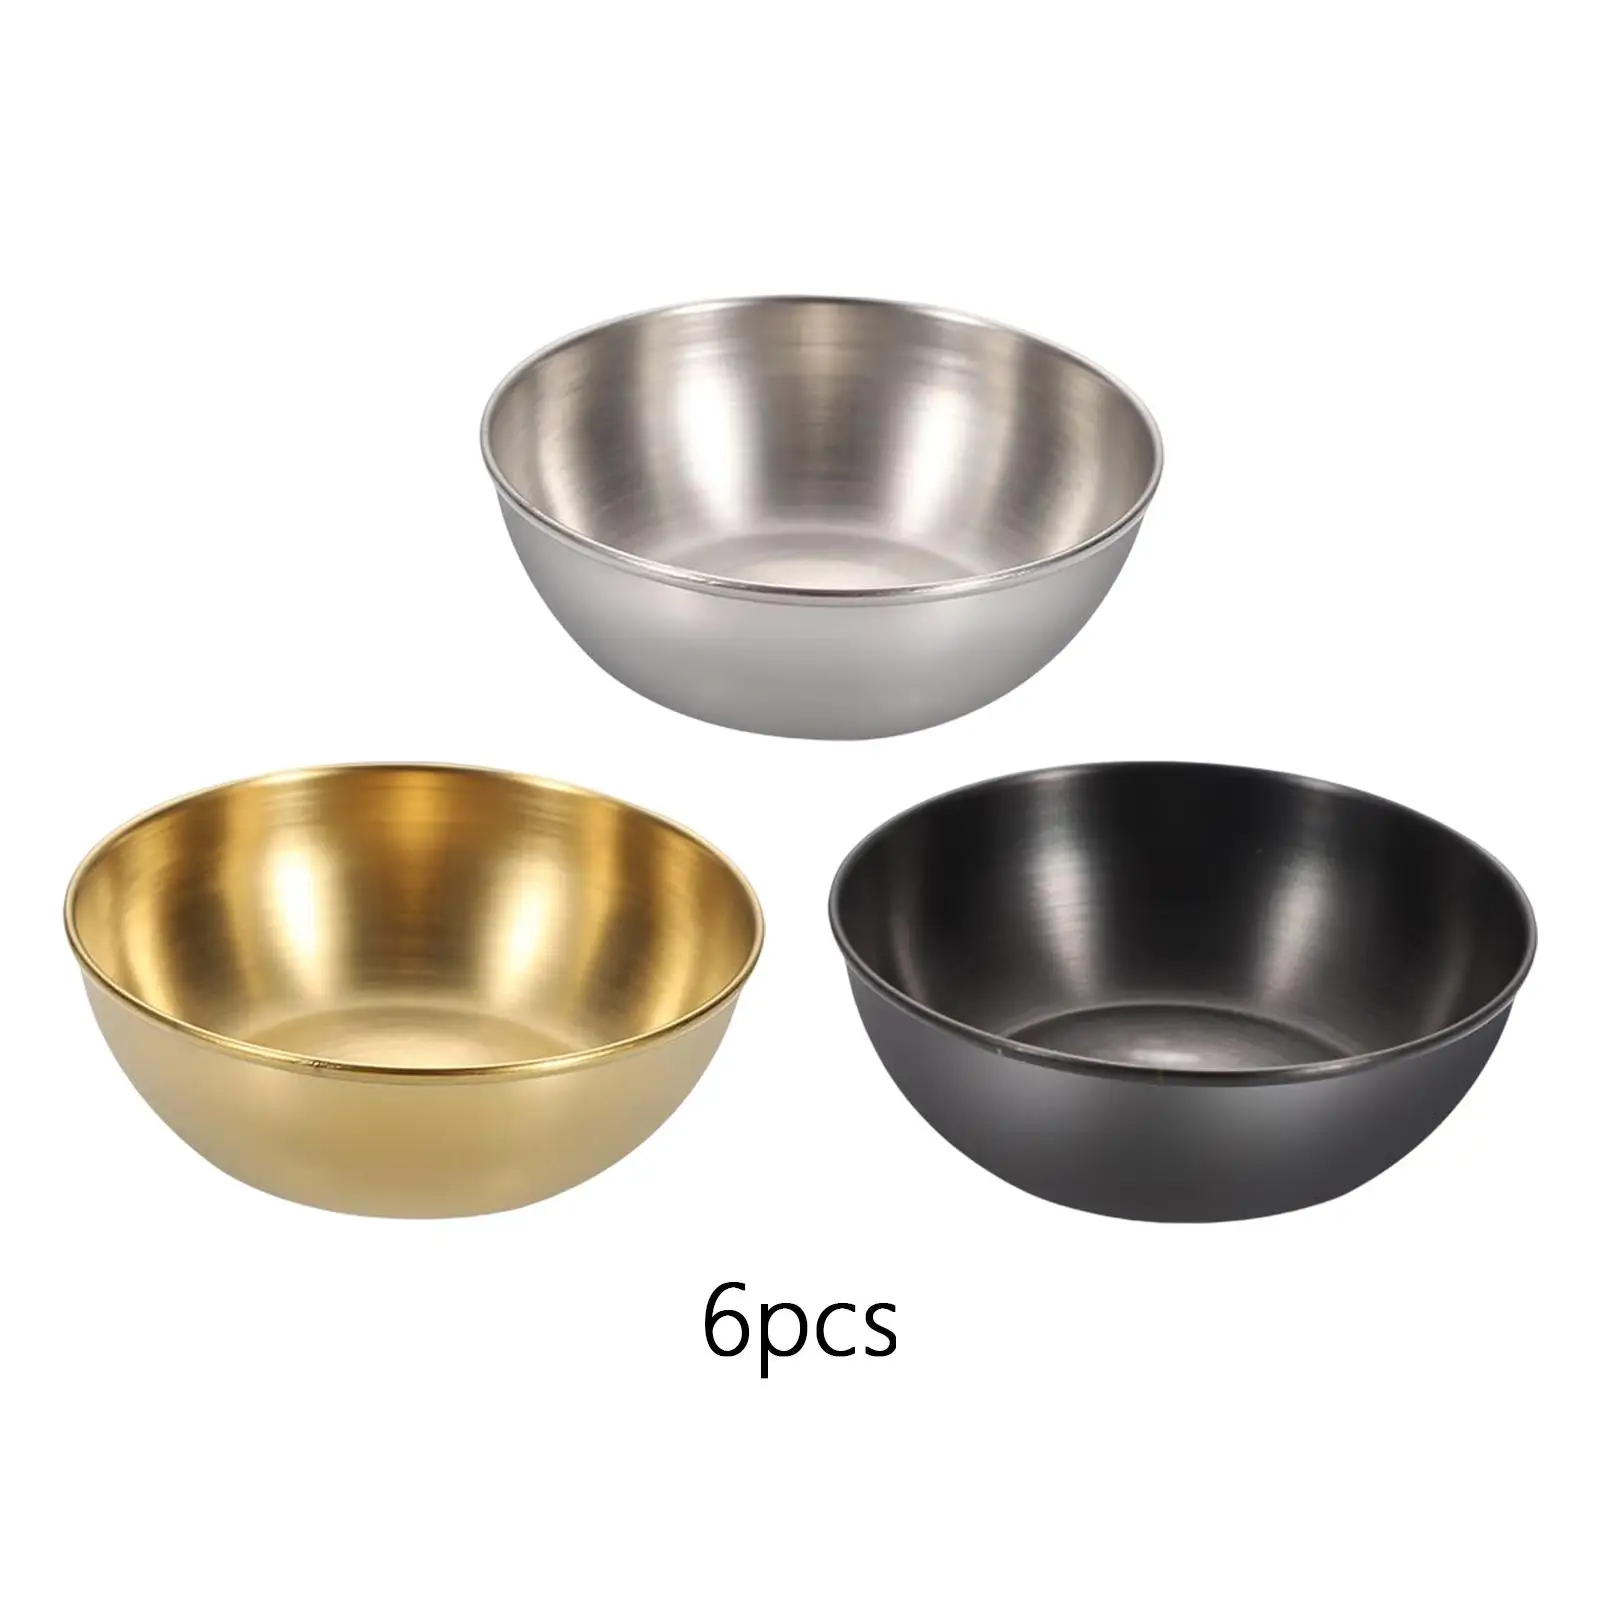 6 Piece Dipping Sauce Cups Set Reusable Bowl for Restaurant Kitchen Camping